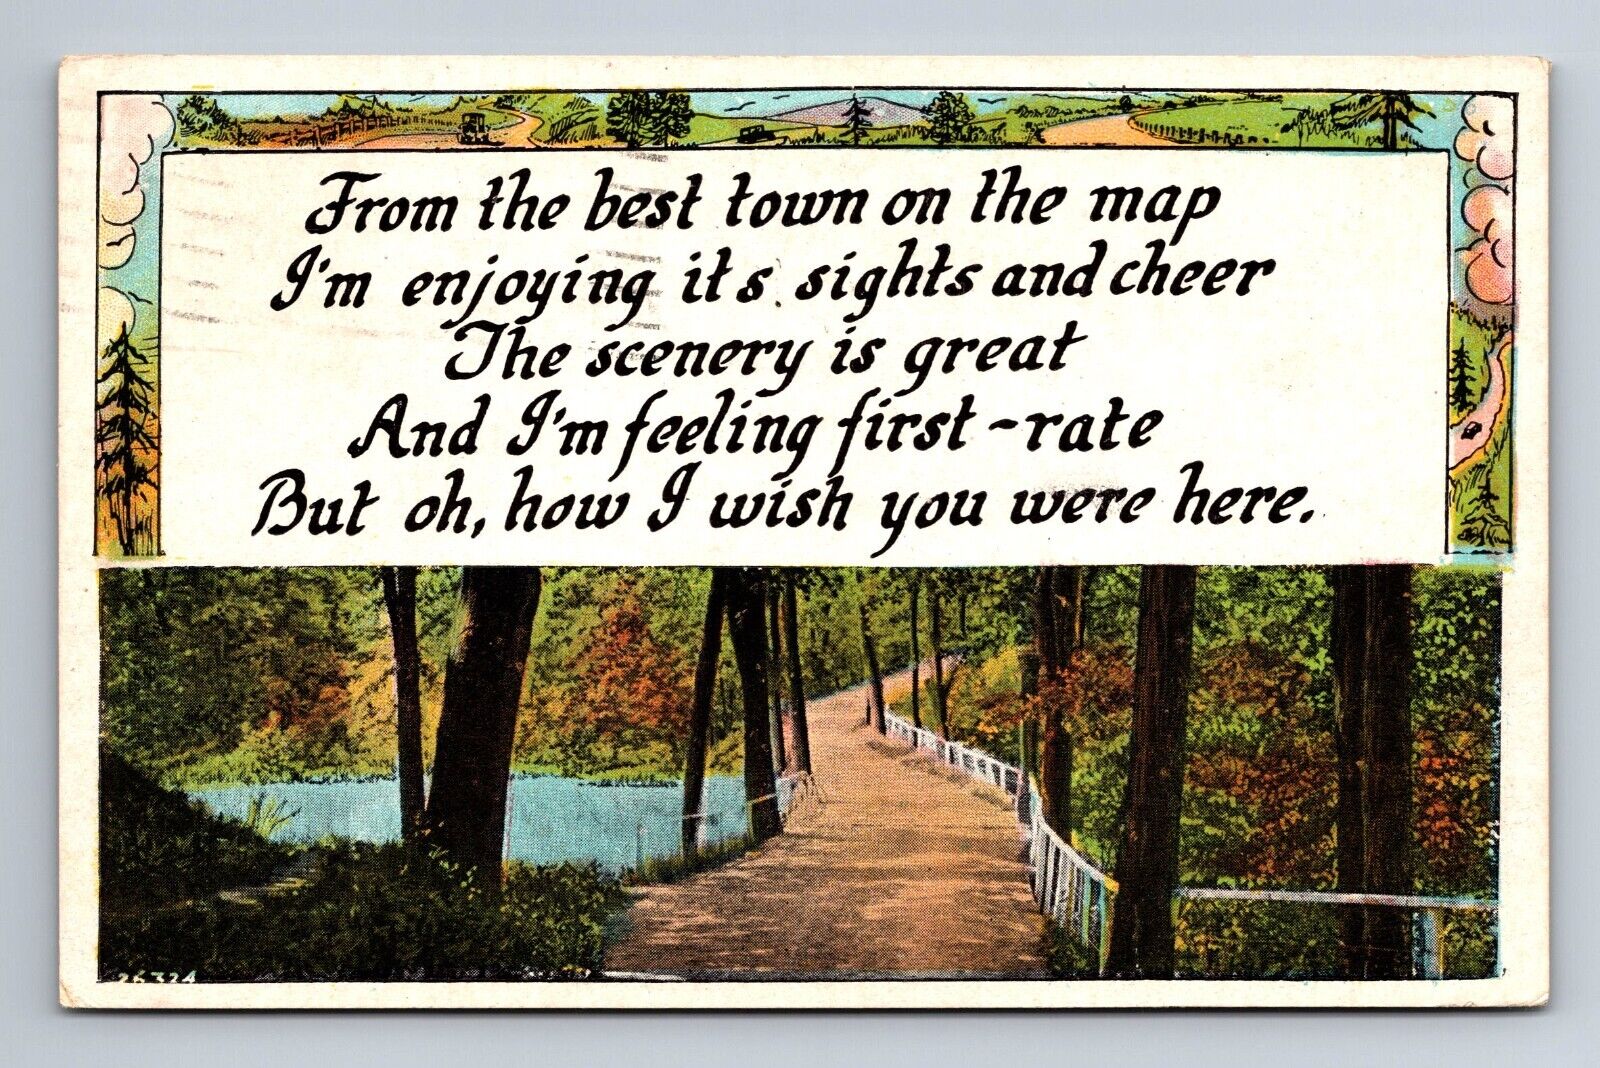 Greetings From the Best Town on the Map Wish You Were Here Postcard c1929